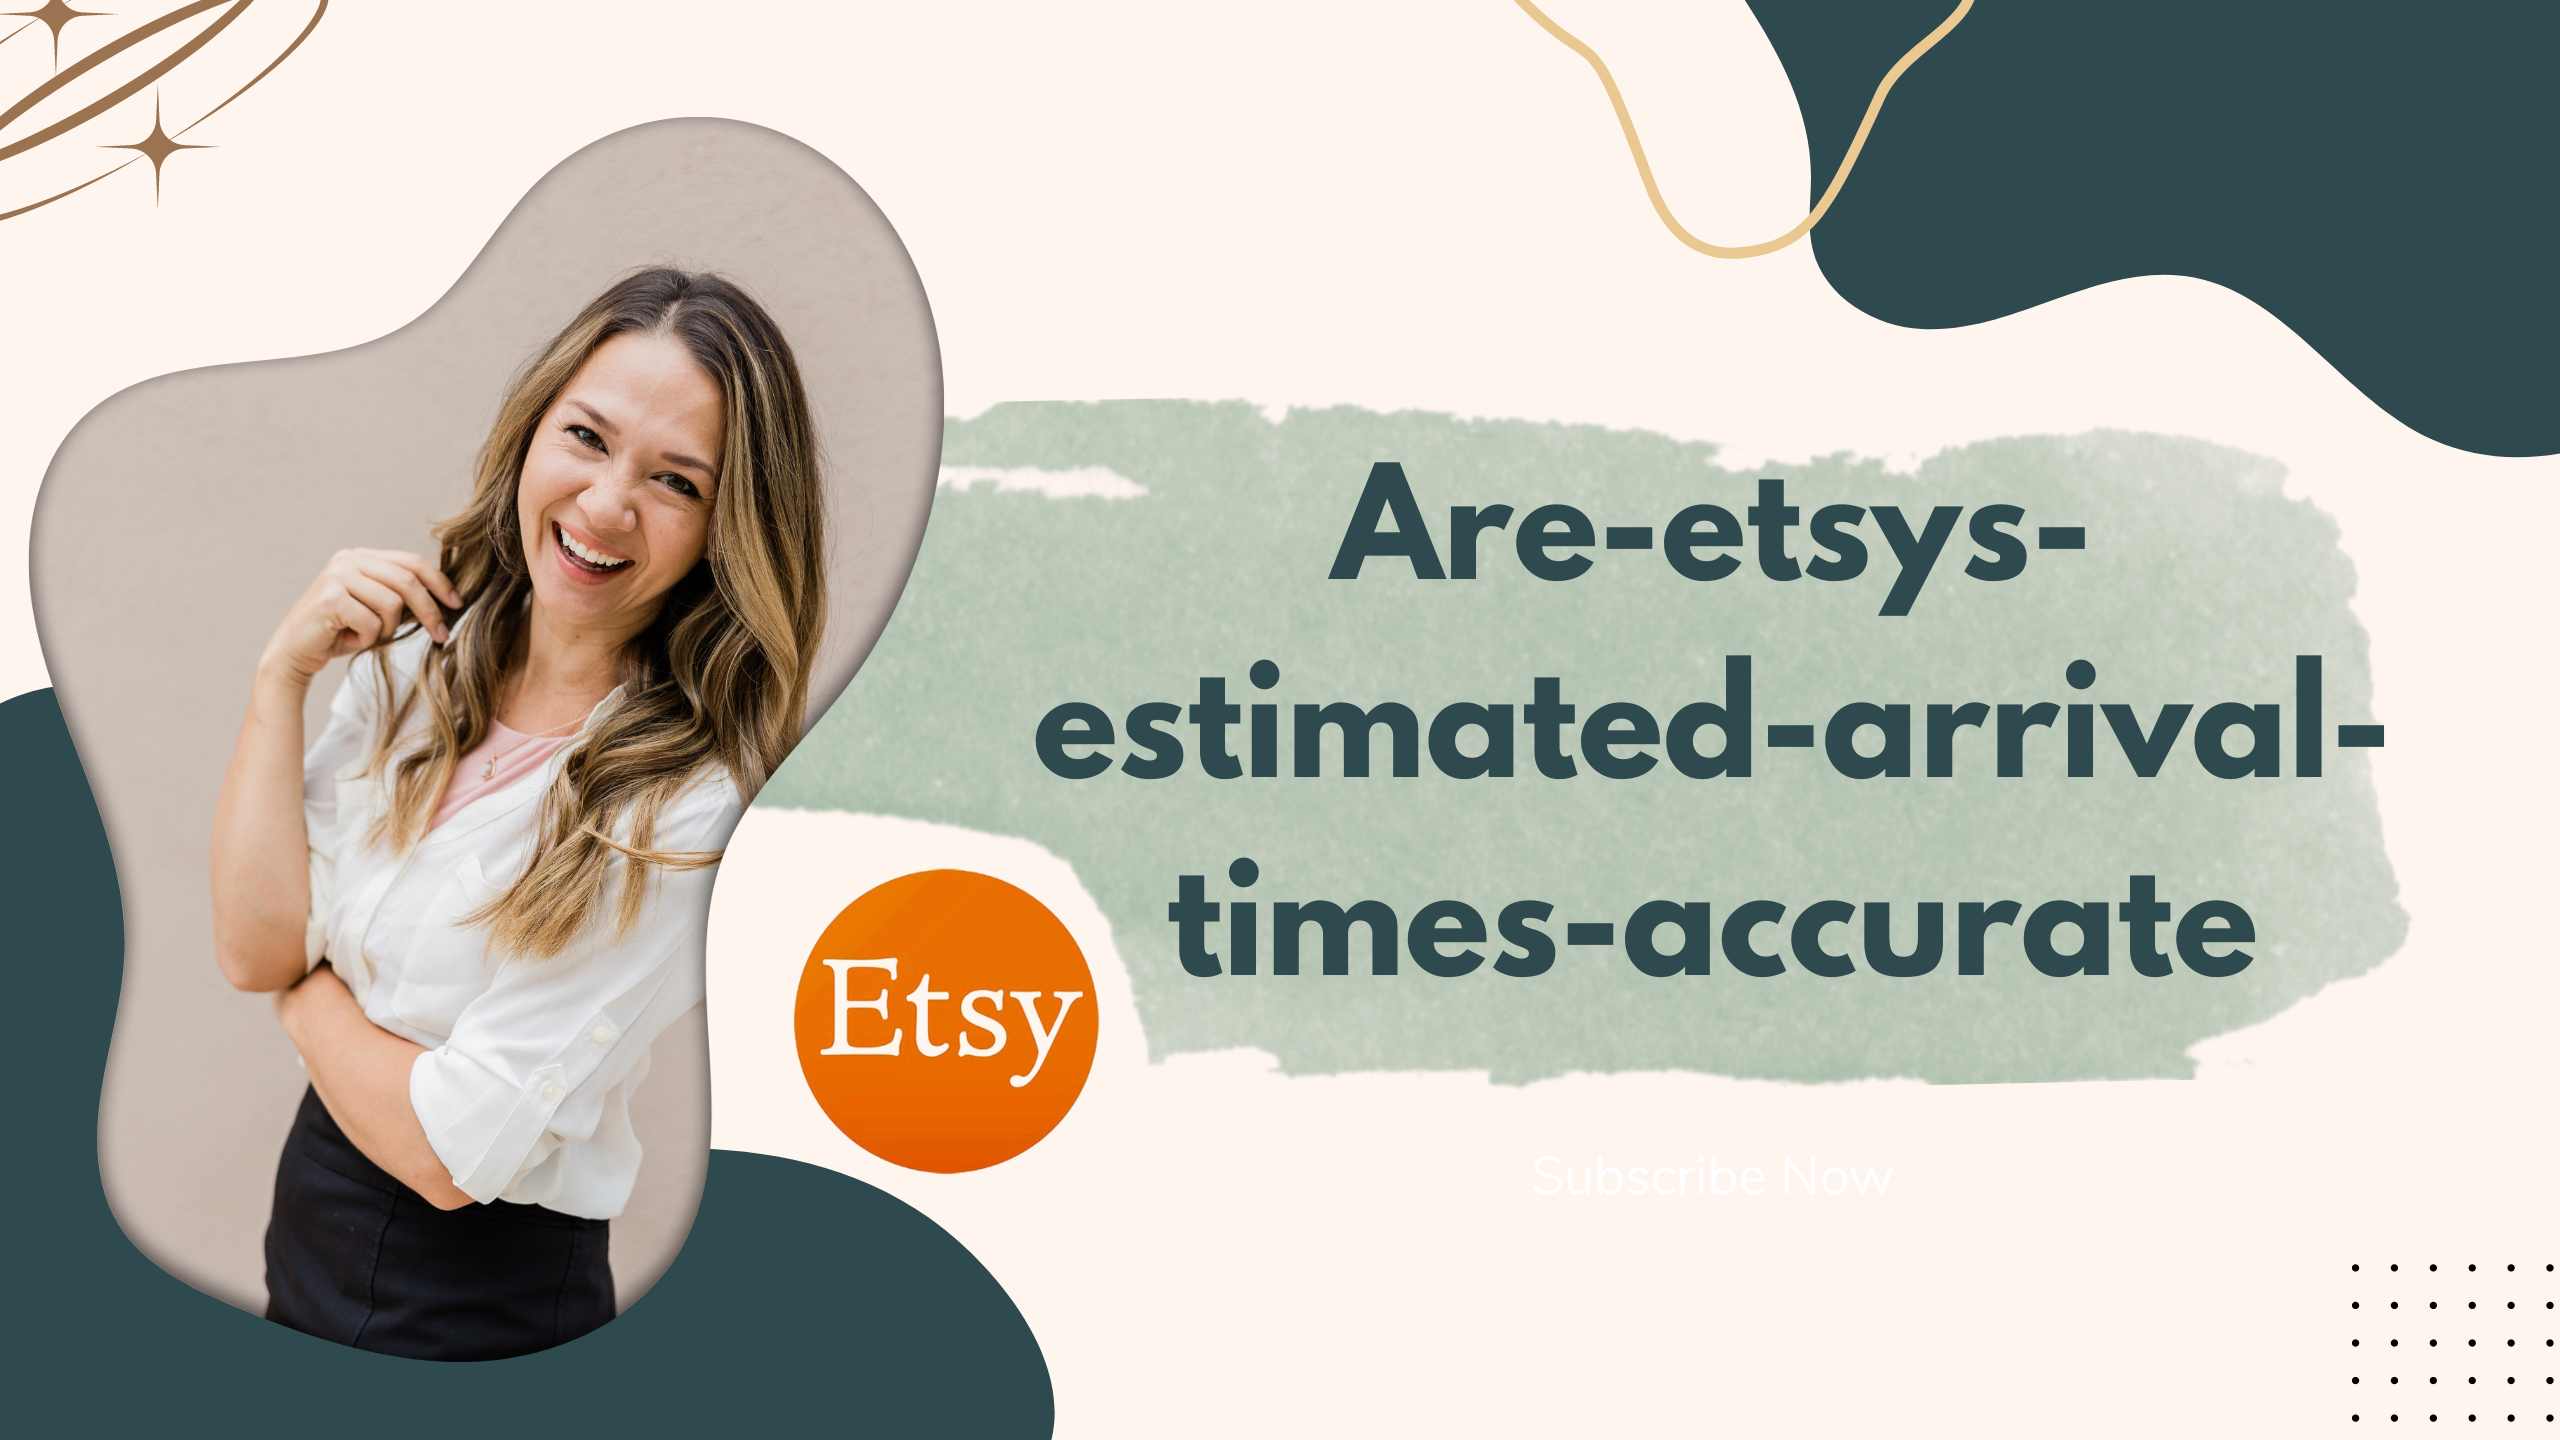 Evaluating the Accuracy of Etsy's Projected Delivery Timelines